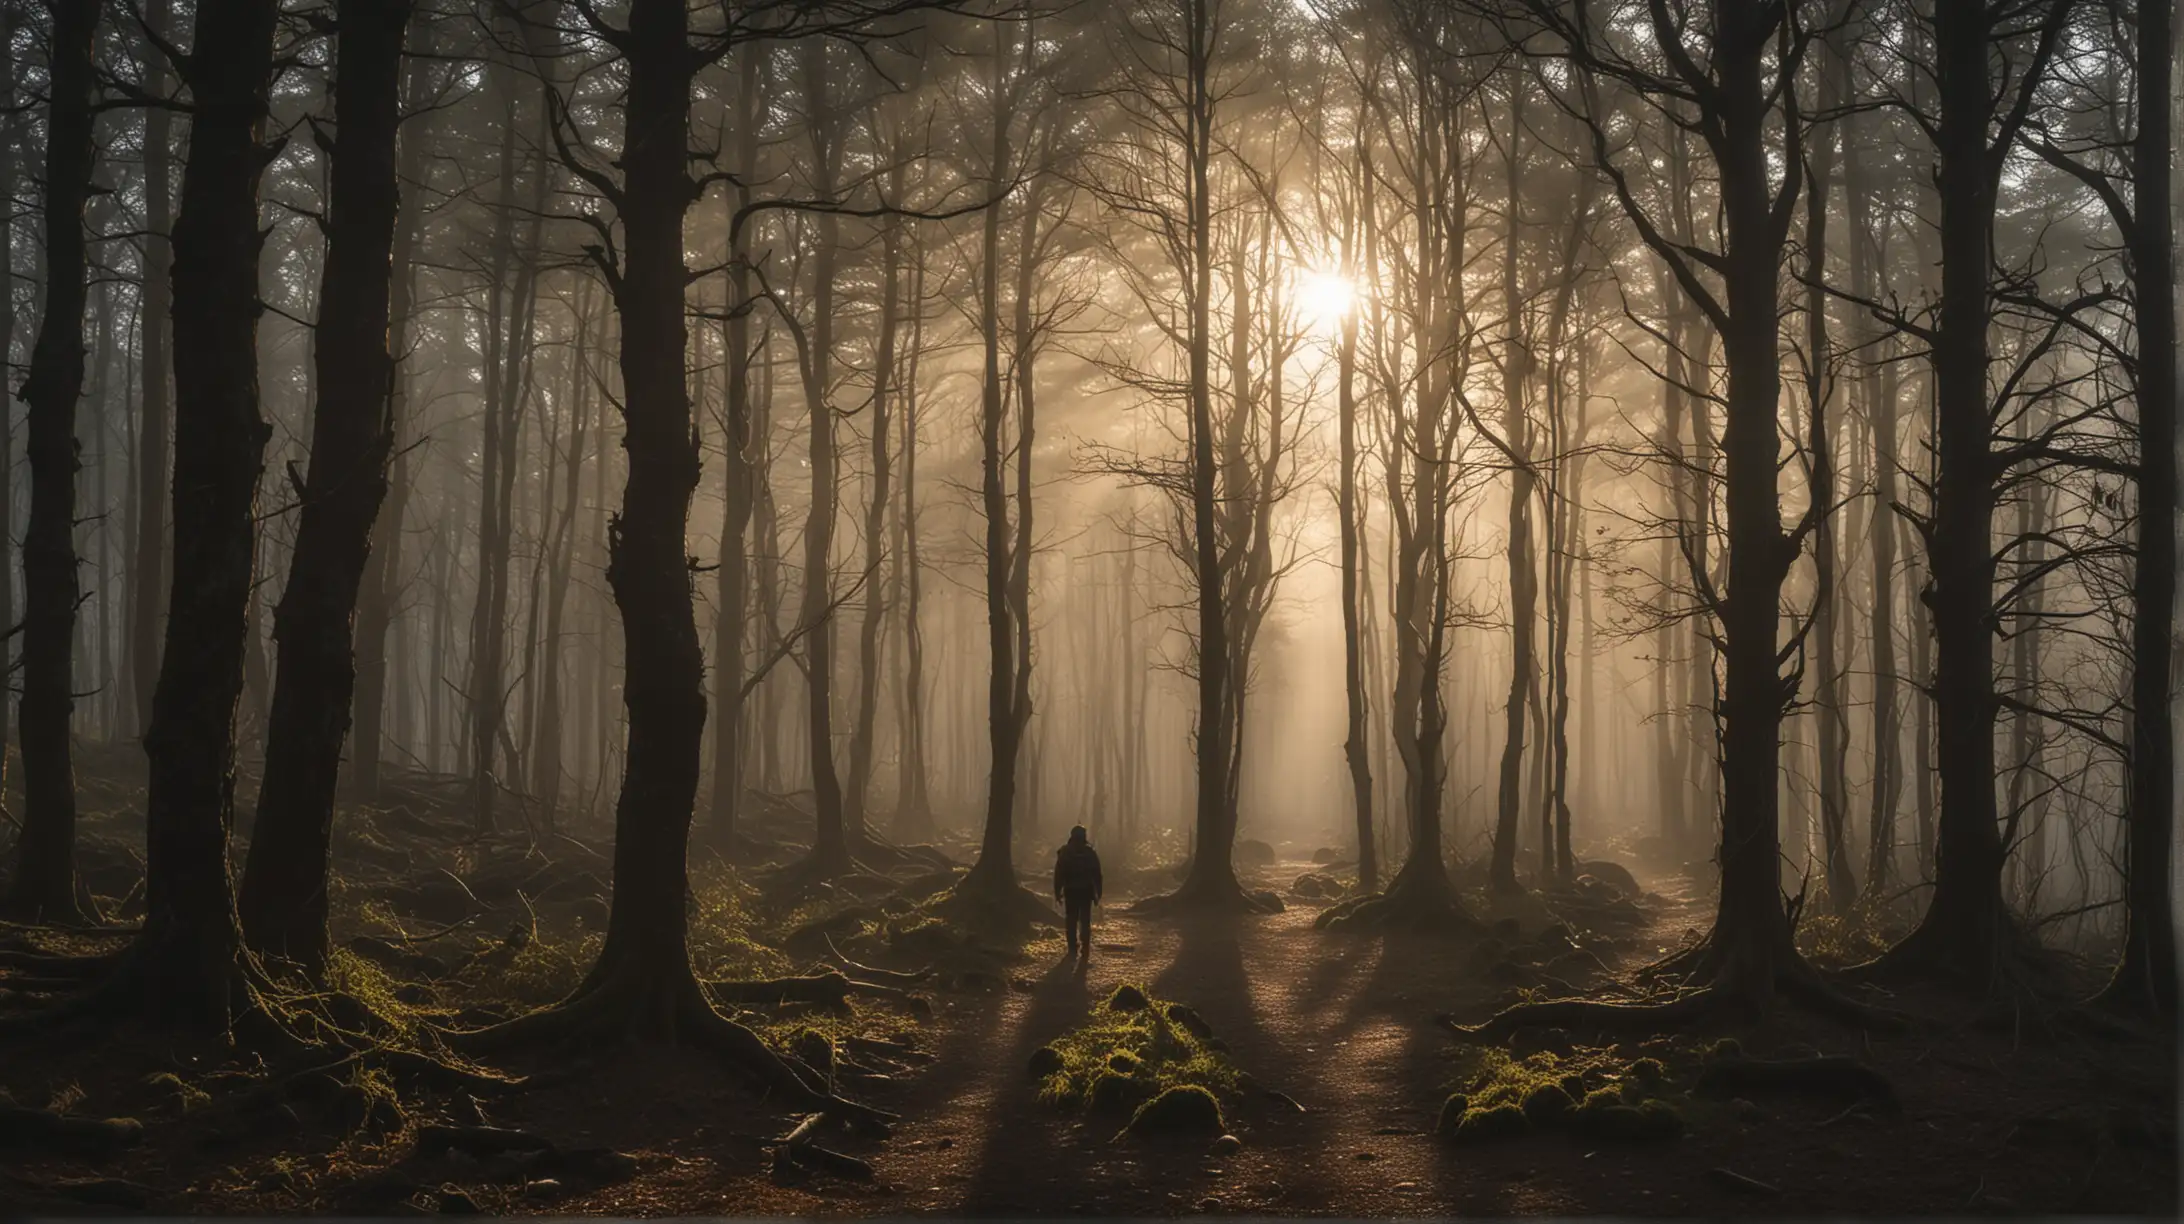 A seasoned hiker stands at the edge of a dense, dark forest as the sun sets, casting long shadows through the trees. The forest entrance is shrouded in mist, with twisted trees forming a natural archway. An eerie stillness pervades the scene, and distant, dark shapes hint at the hidden depths of the forest.